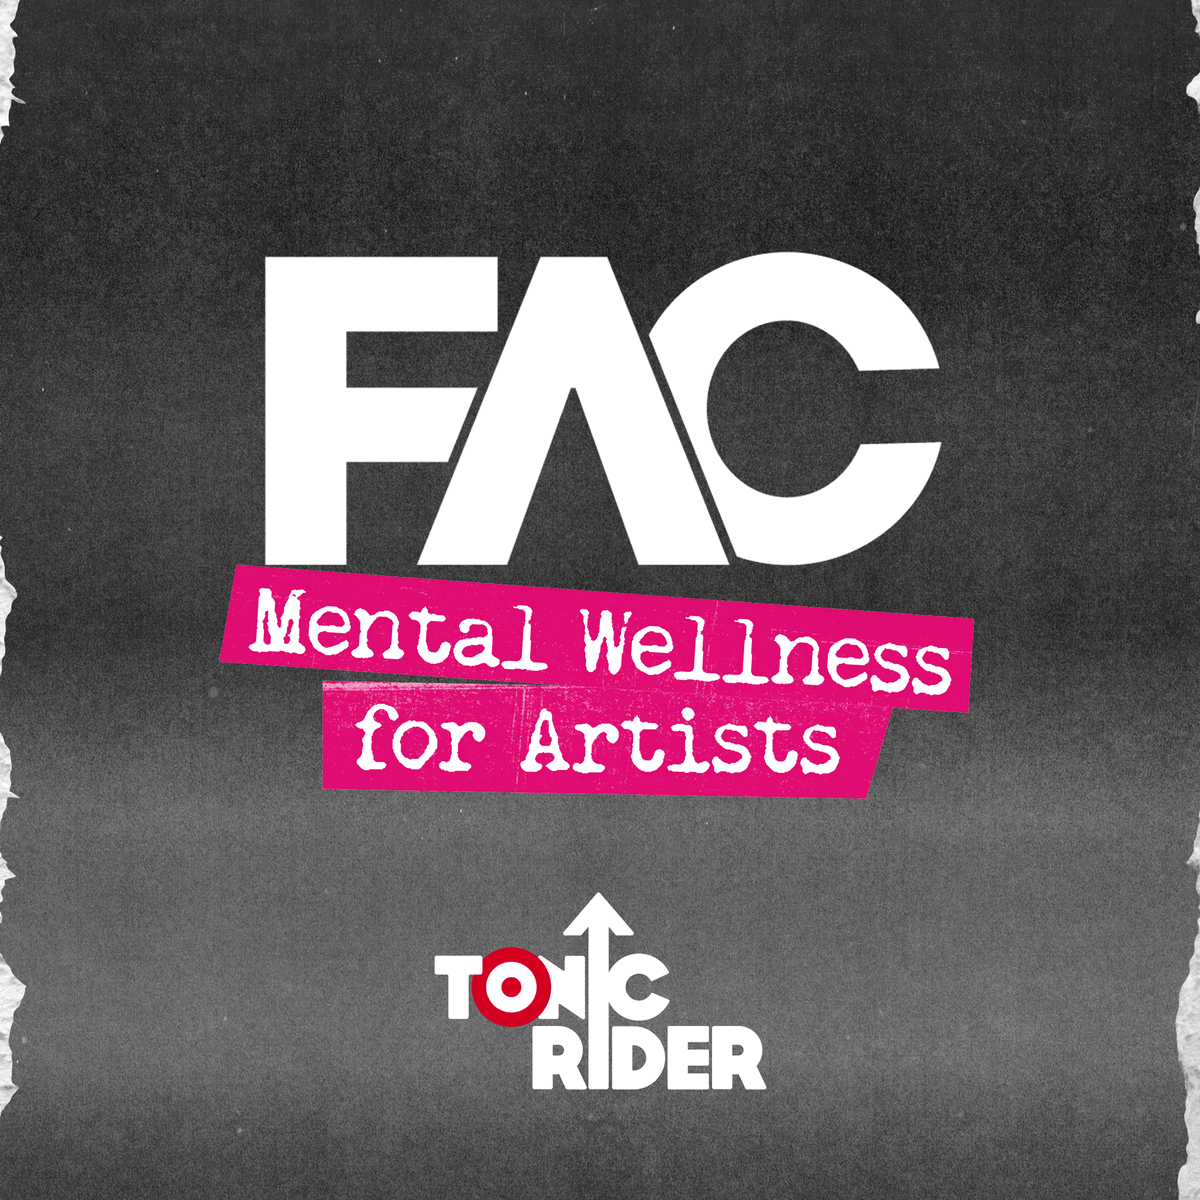 Join us and @FeaturedArtists on Wednesday for a ‘Mental Wellness for Artists’ webinar - with discussions on peer support & 'musicking'. facilitated by @adamficek & Jeordie Shenton For more info > tonicmusic.co.uk/post/fac101 #TonicRider #FAC101 #MentalHealth #Wellbeing #Music